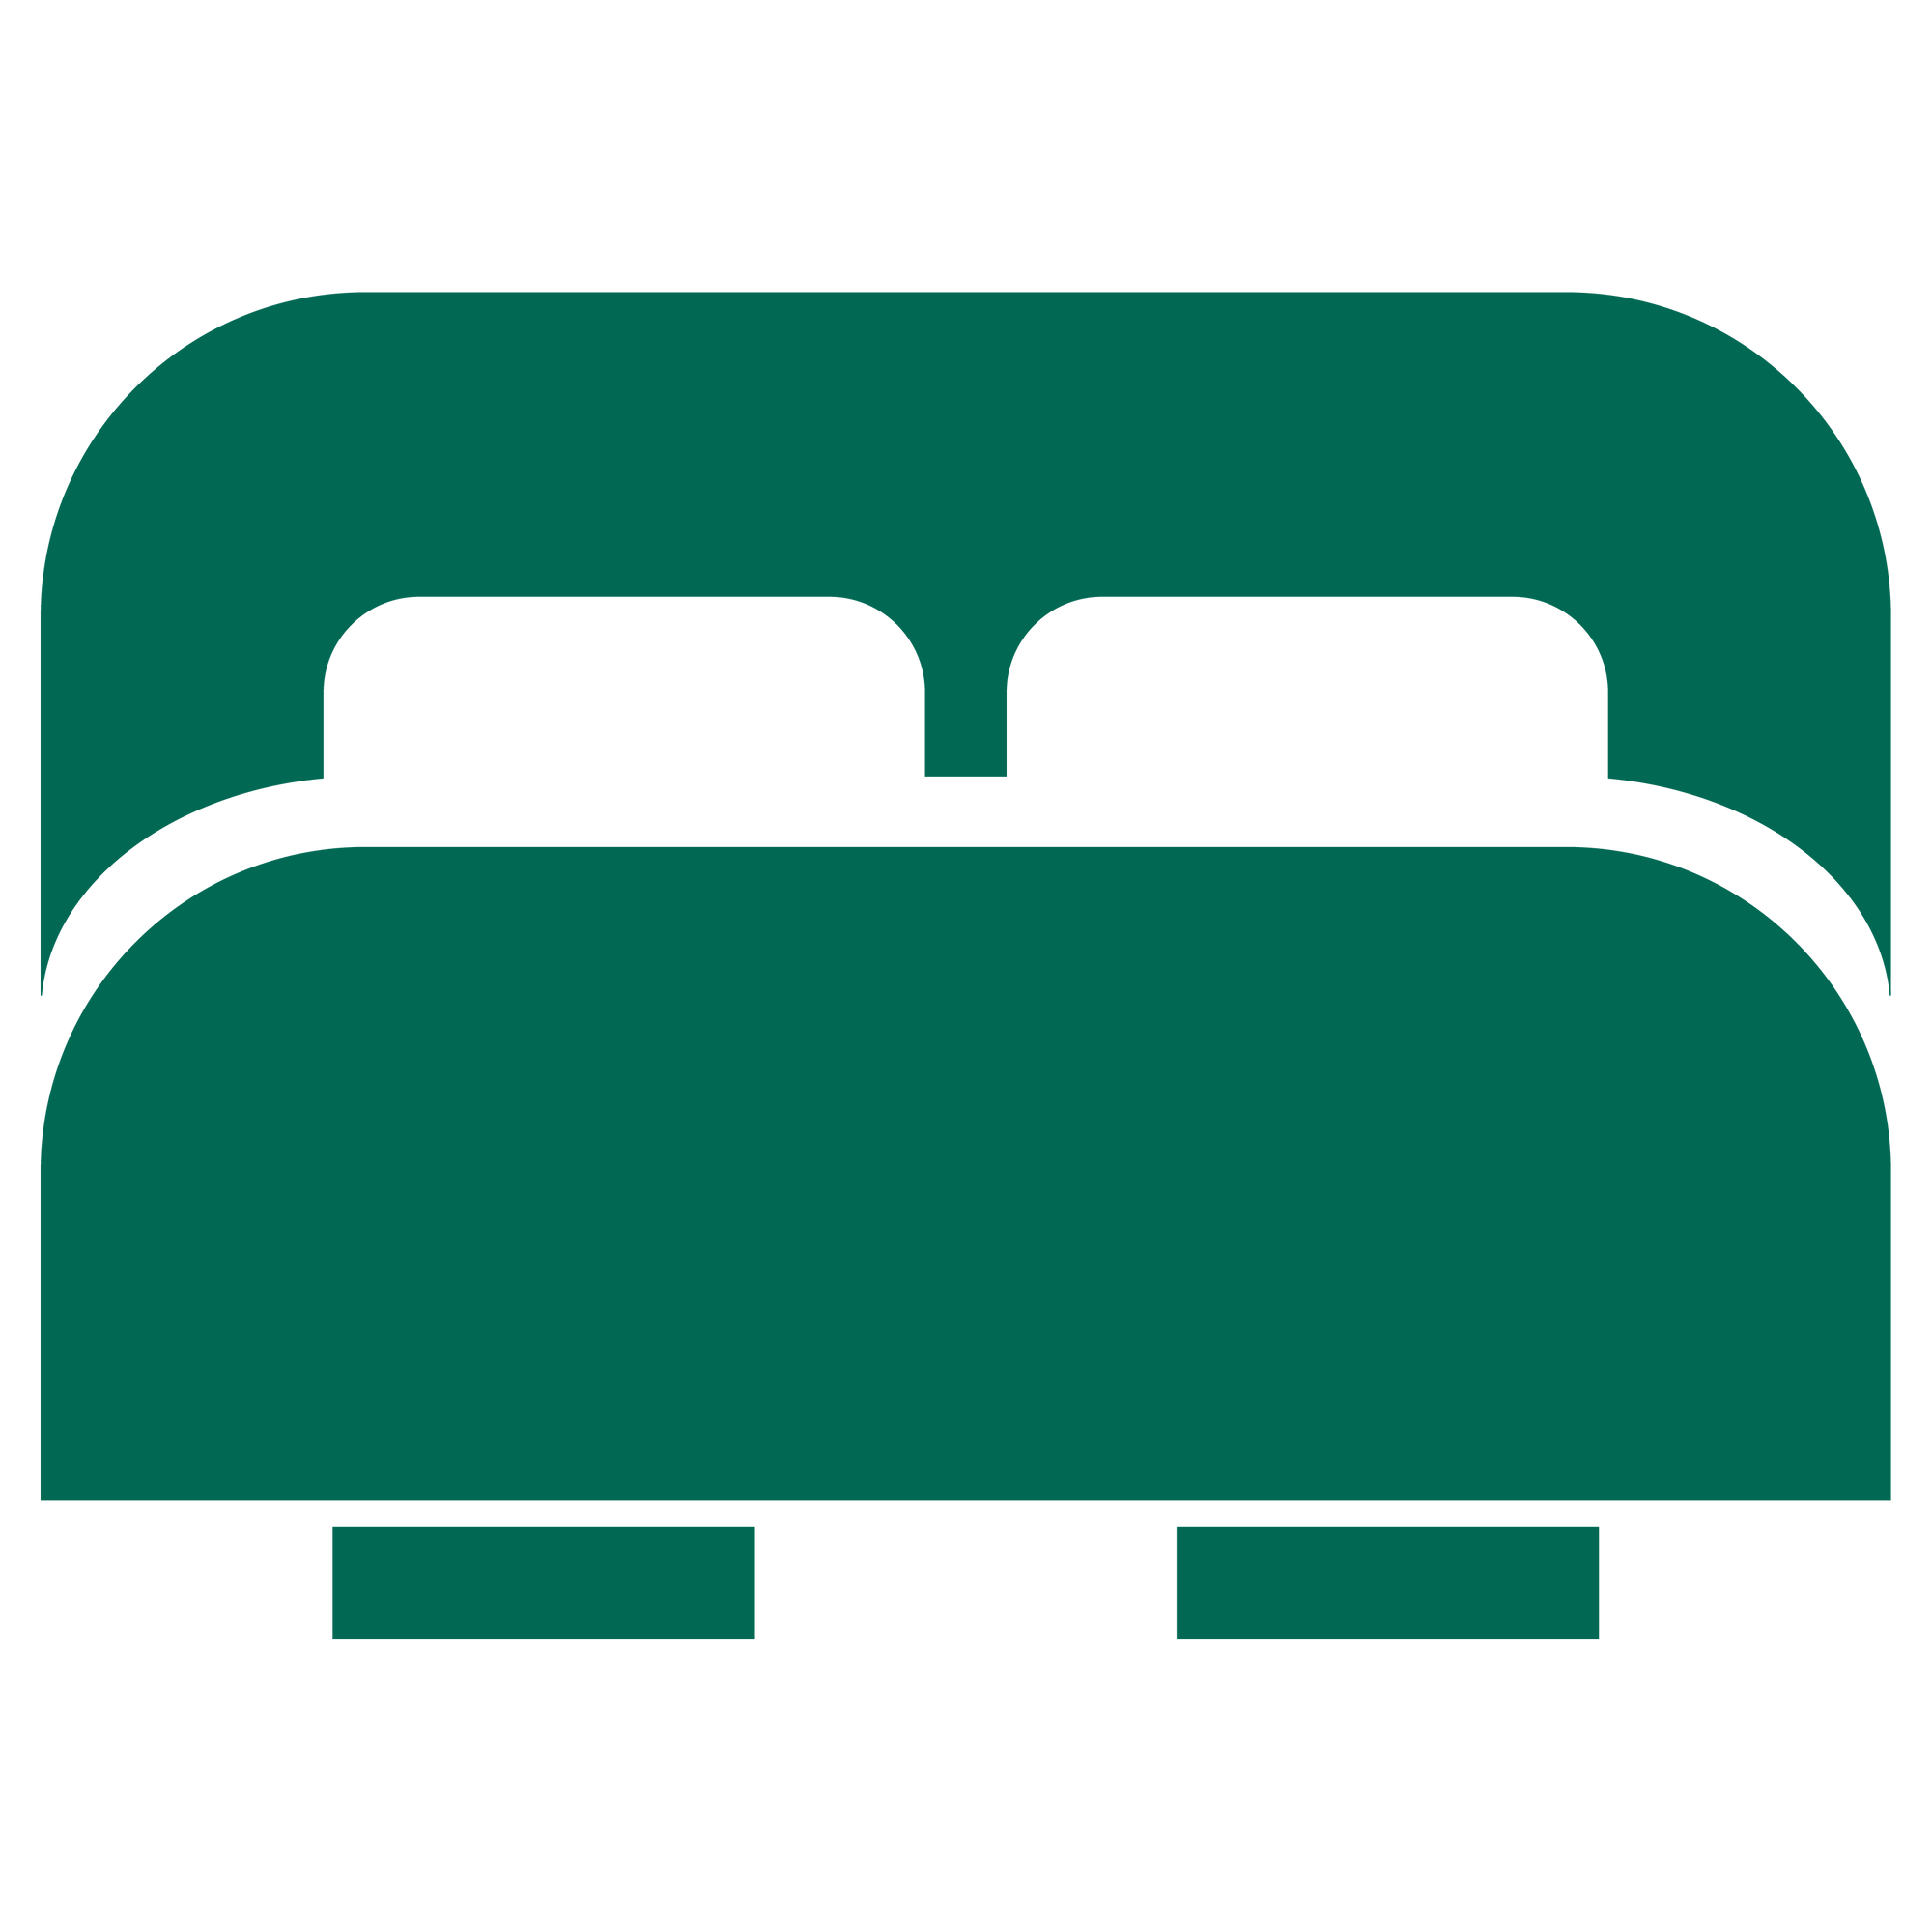 A vector icon of a Bed used at Sunway Putra Hotel